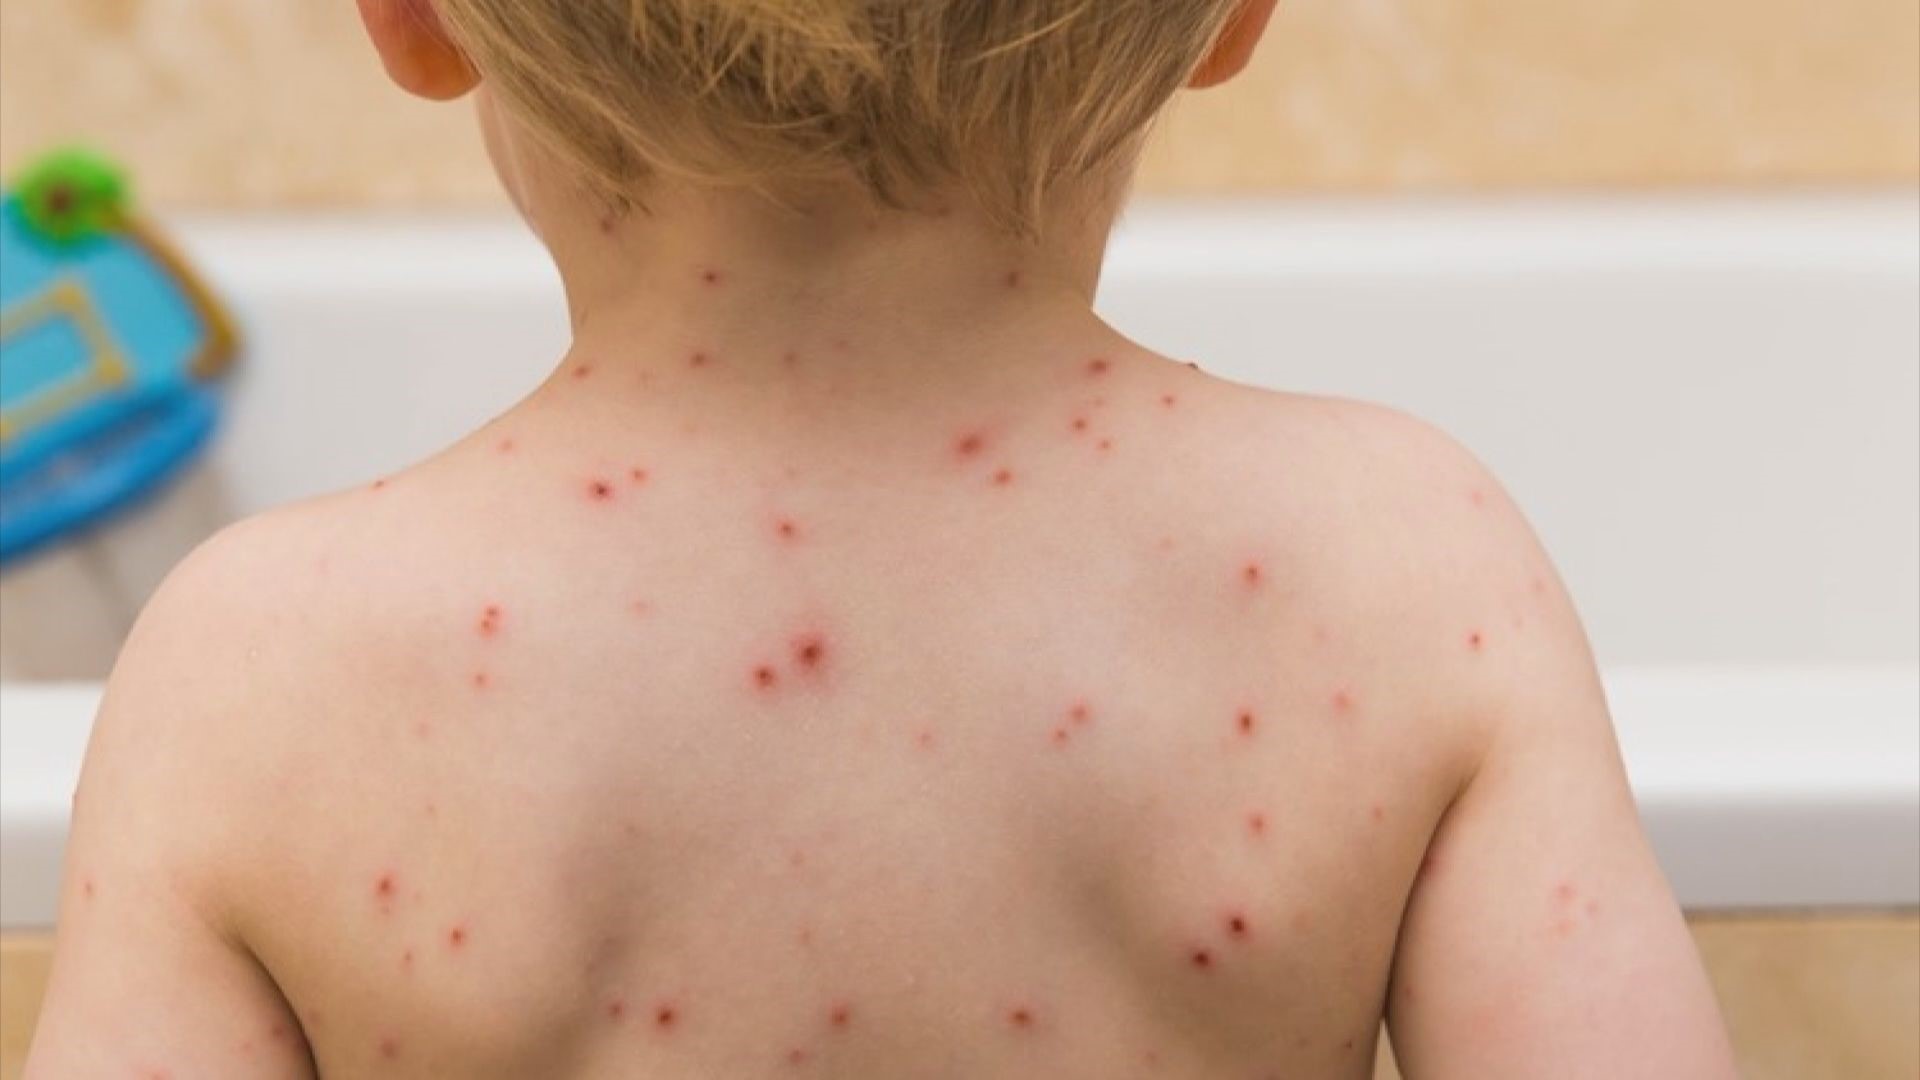 A viral post claims Head and Shoulders shampoo soothes chicken pox irritation. A doctor says it’s true.